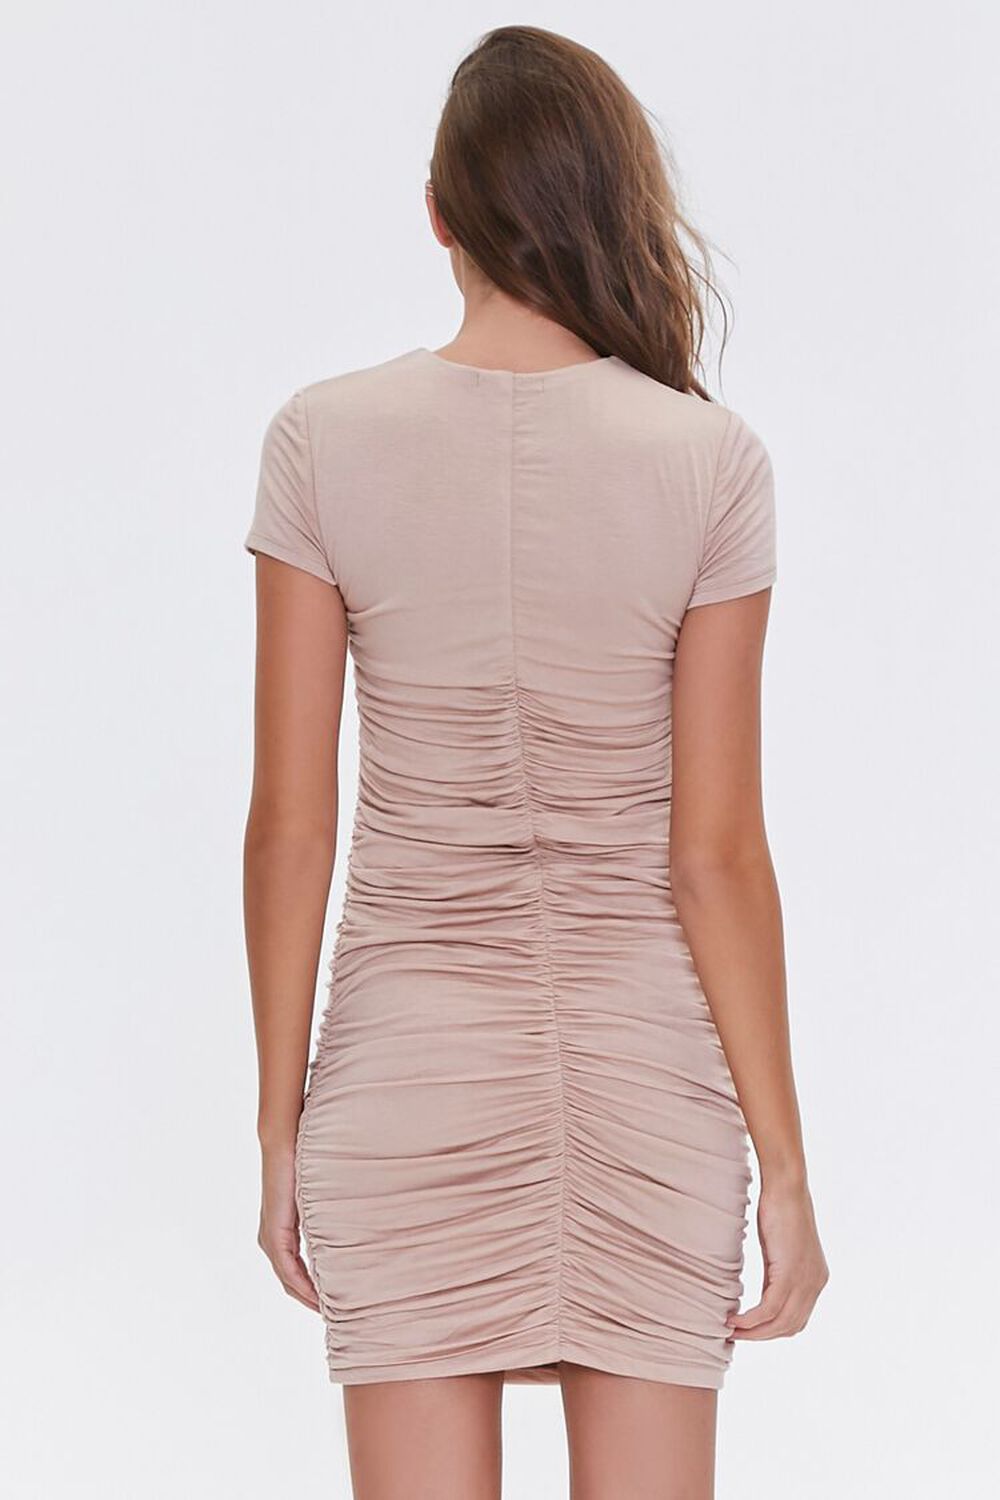 TAUPE Ruched Bodycon Mini Dress, image 3